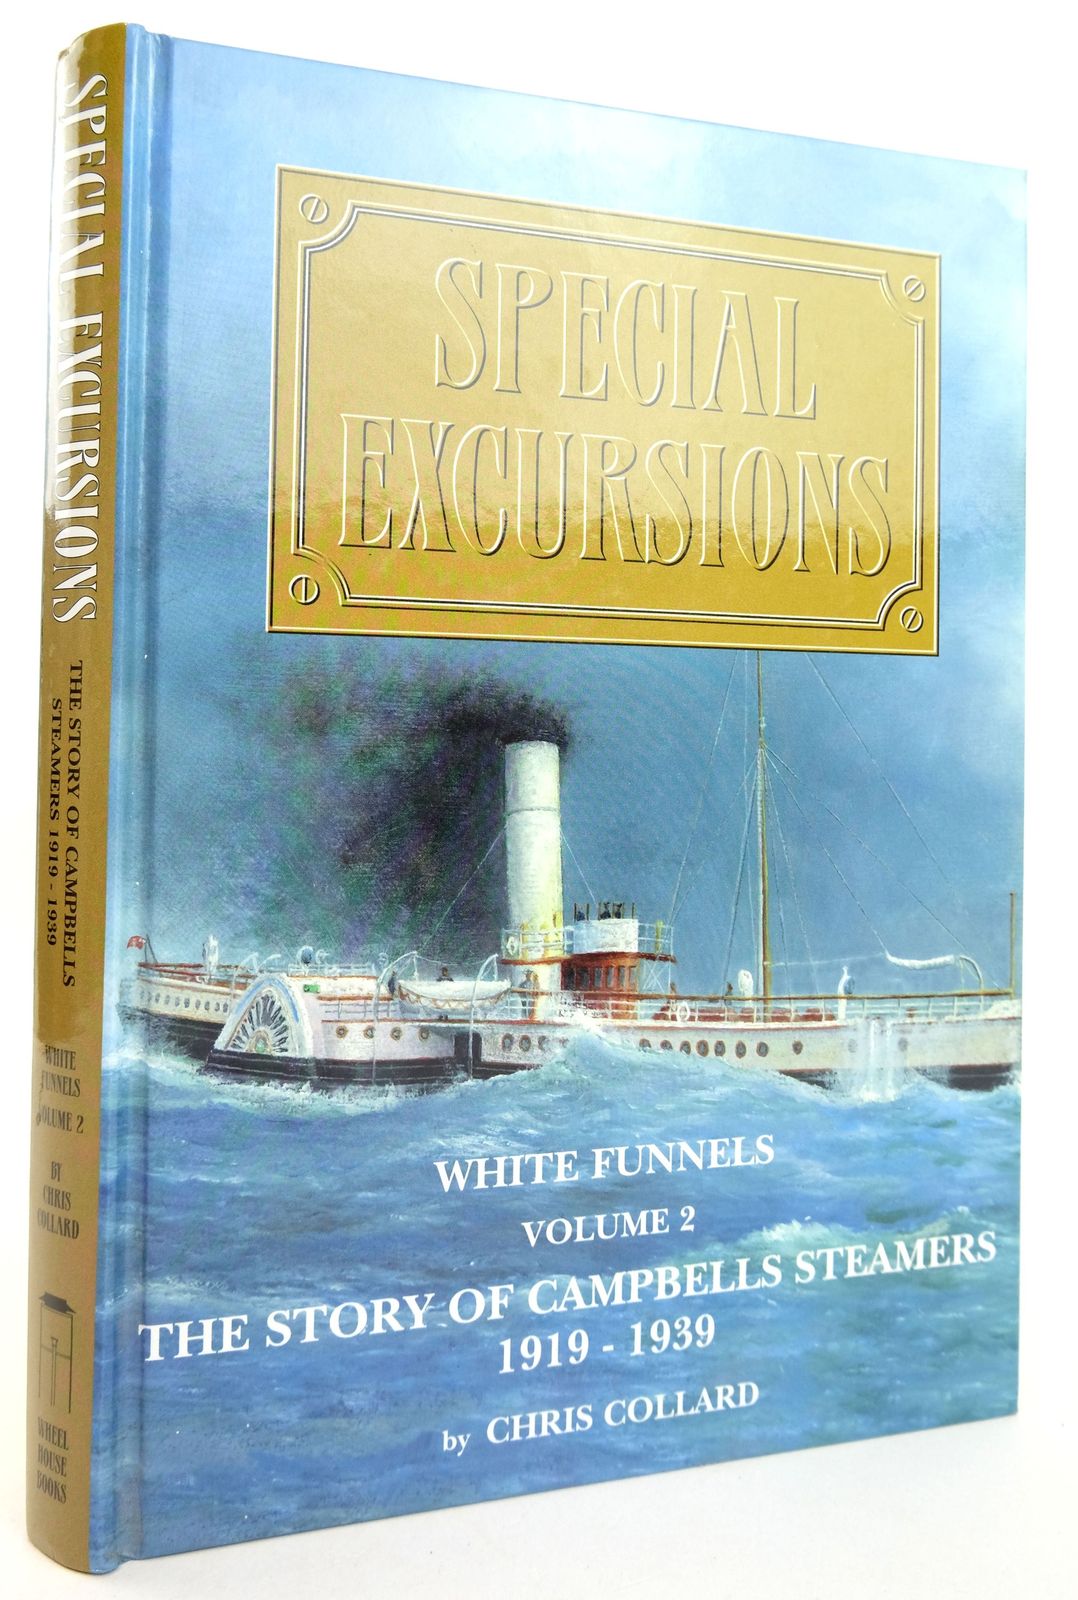 Photo of SPECIAL EXCURSIONS WHITE FUNNELS VOLUME 2- Stock Number: 1819360